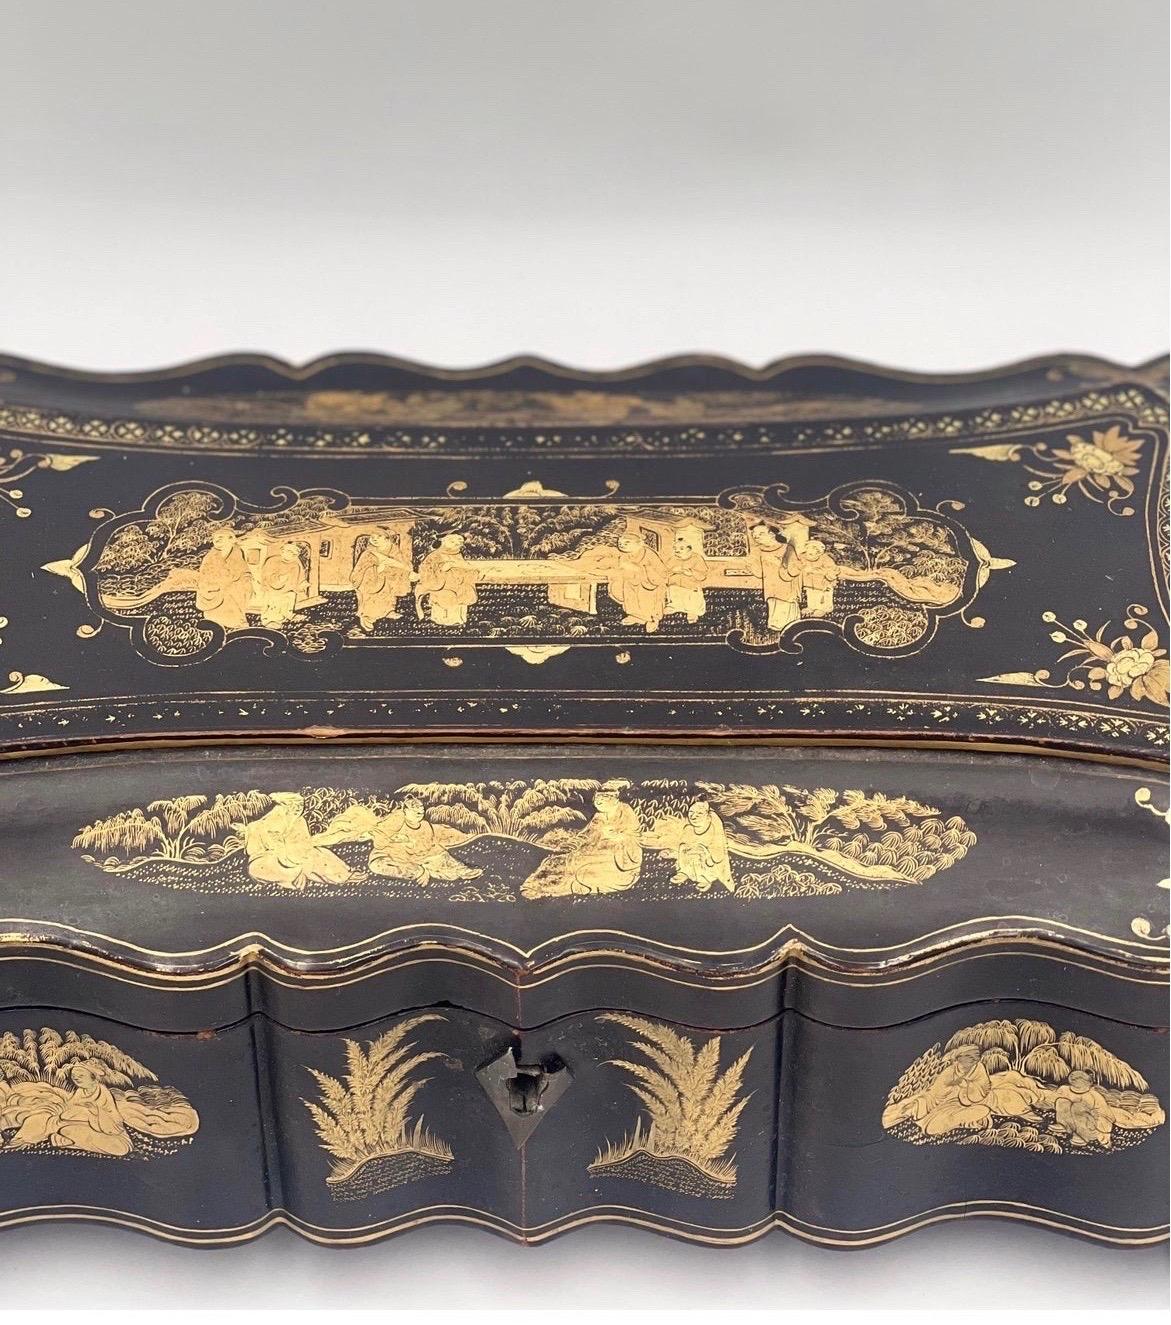 Rare form for this 19th century chinese export lacquer decorated glove or jewelry box. With finely carved wood foo dog feet.